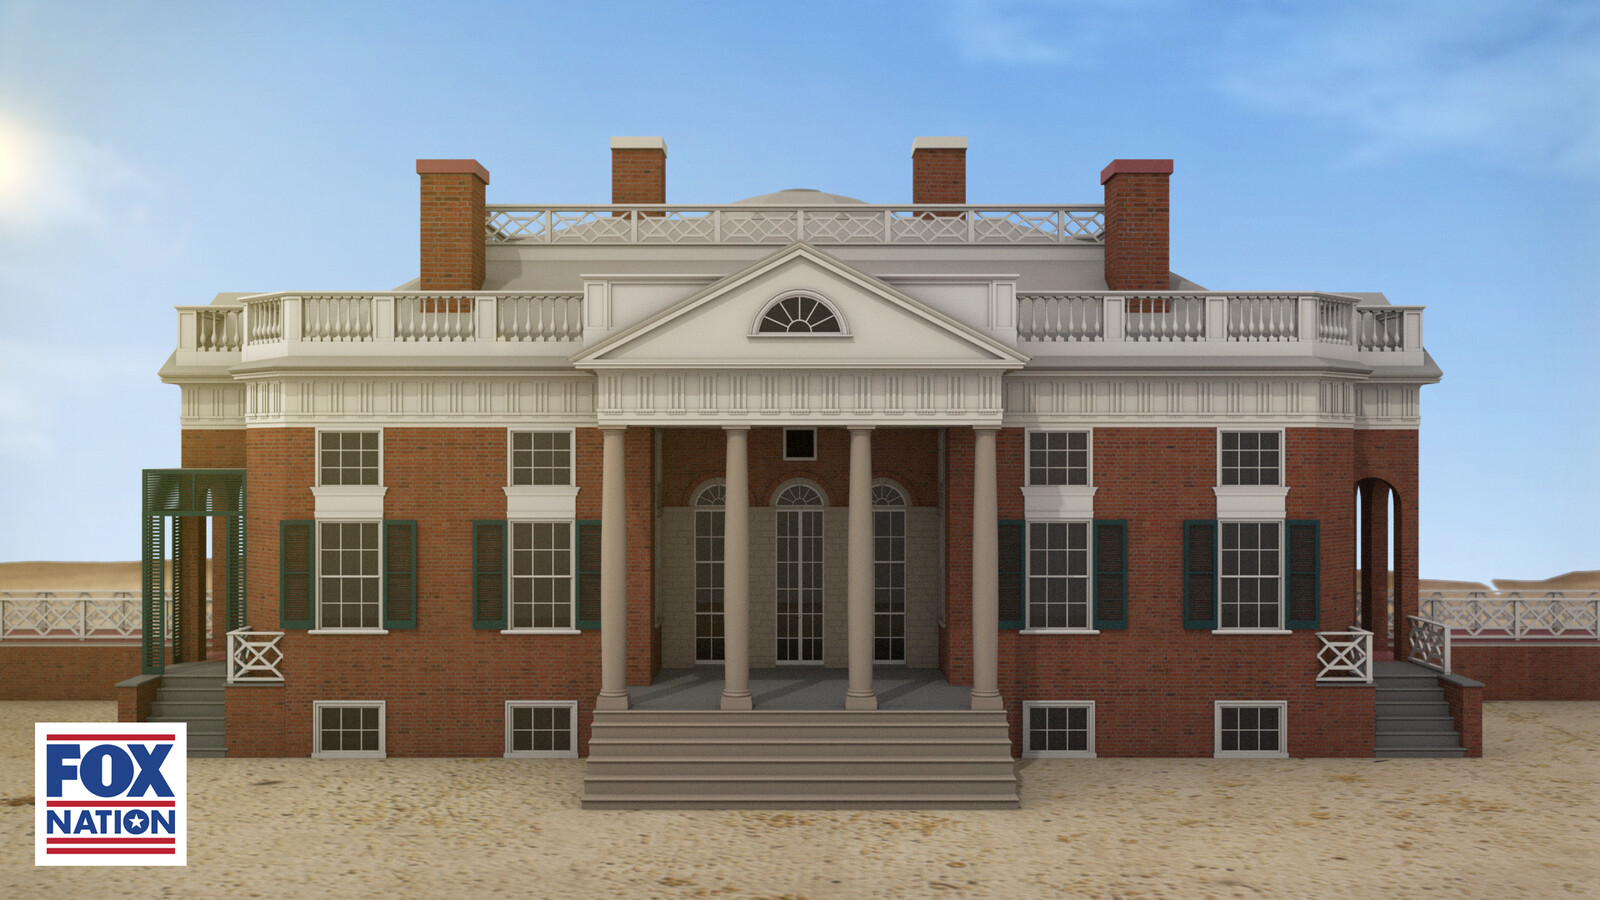 This is a still of the opening frame of the Monticello animation.
©FOX NATION